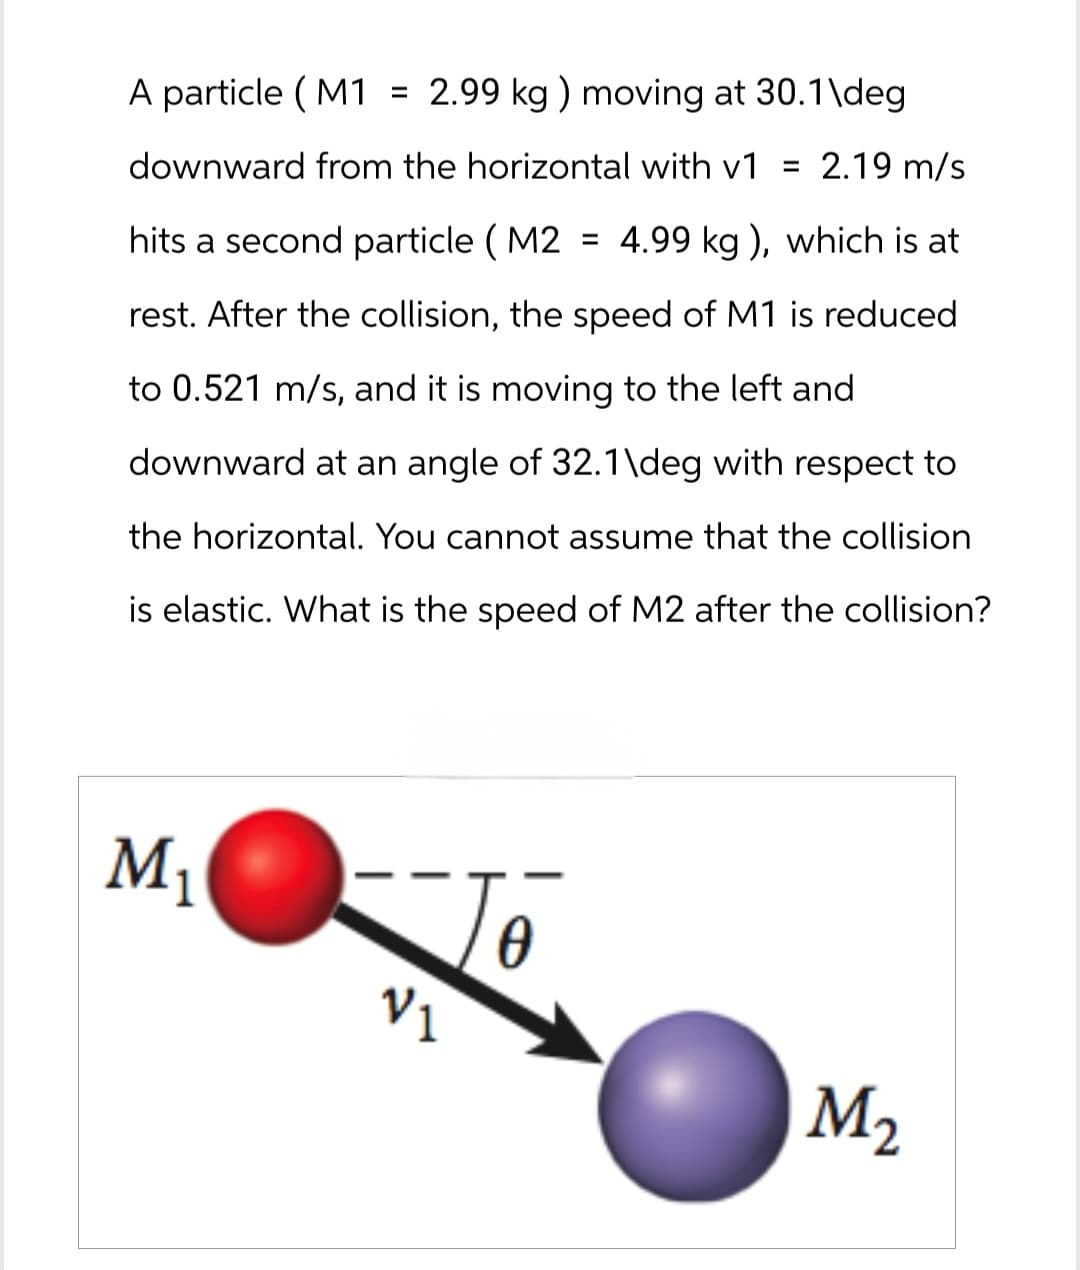 A particle (M1 = 2.99 kg) moving at 30.1\deg.
downward from the horizontal with v1
= 2.19 m/s
hits a second particle (M2 = 4.99 kg), which is at
rest. After the collision, the speed of M1 is reduced
to 0.521 m/s, and it is moving to the left and
downward at an angle of 32.1\deg with respect to
the horizontal. You cannot assume that the collision
is elastic. What is the speed of M2 after the collision?
M₁
V₁
M2